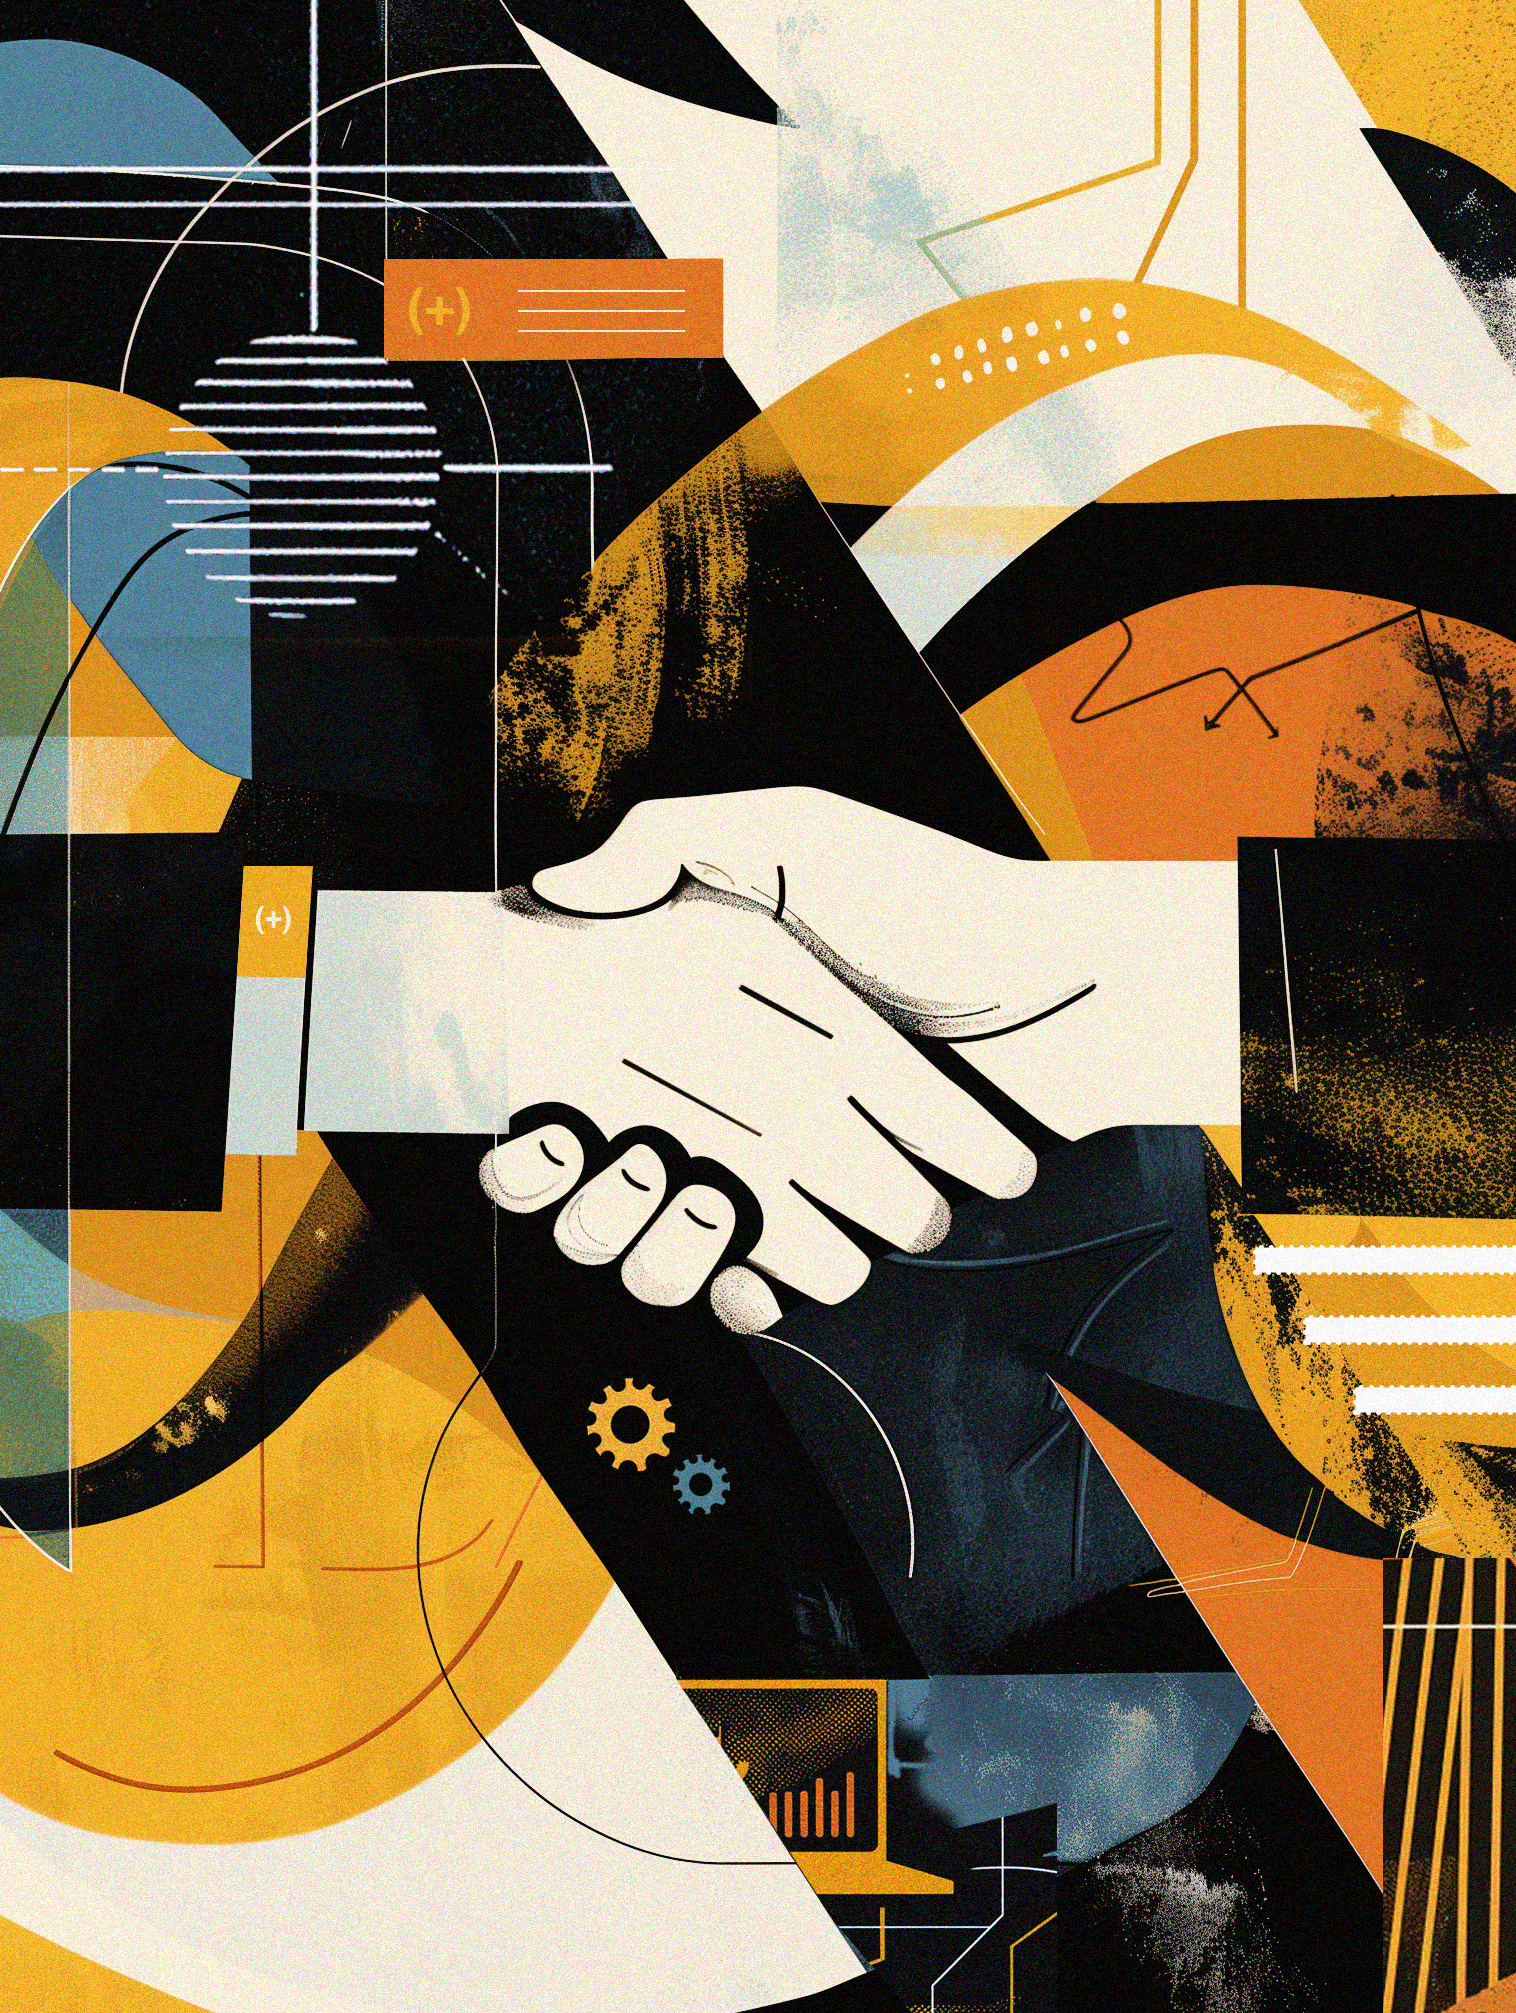 Two hands shaking against a backdrop of abstract geometric shapes and lines in a palette of yellow, black, white, and orange.